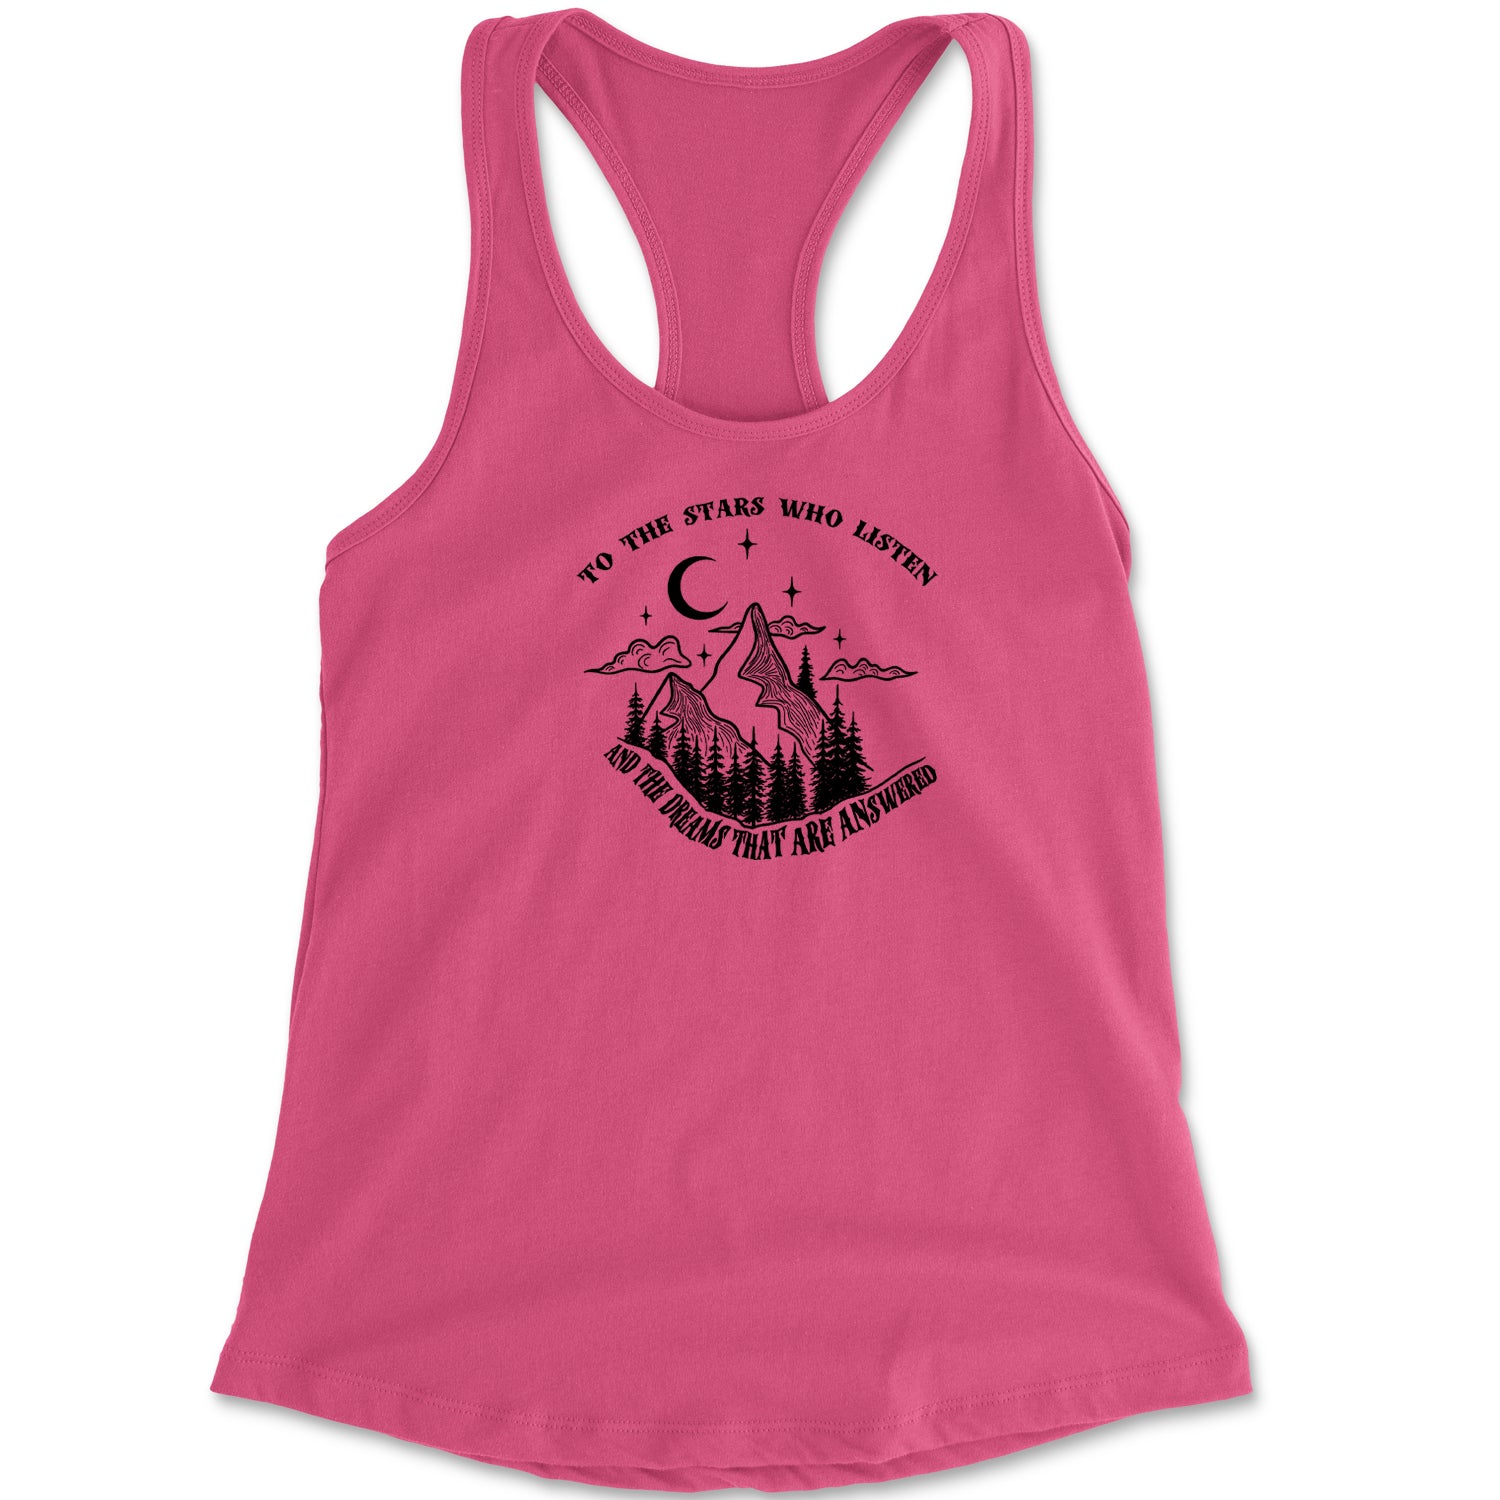 To The Stars Who Listen… ACOTAR Quote Racerback Tank Top for Women acotar, court, tamlin, thorns by Expression Tees